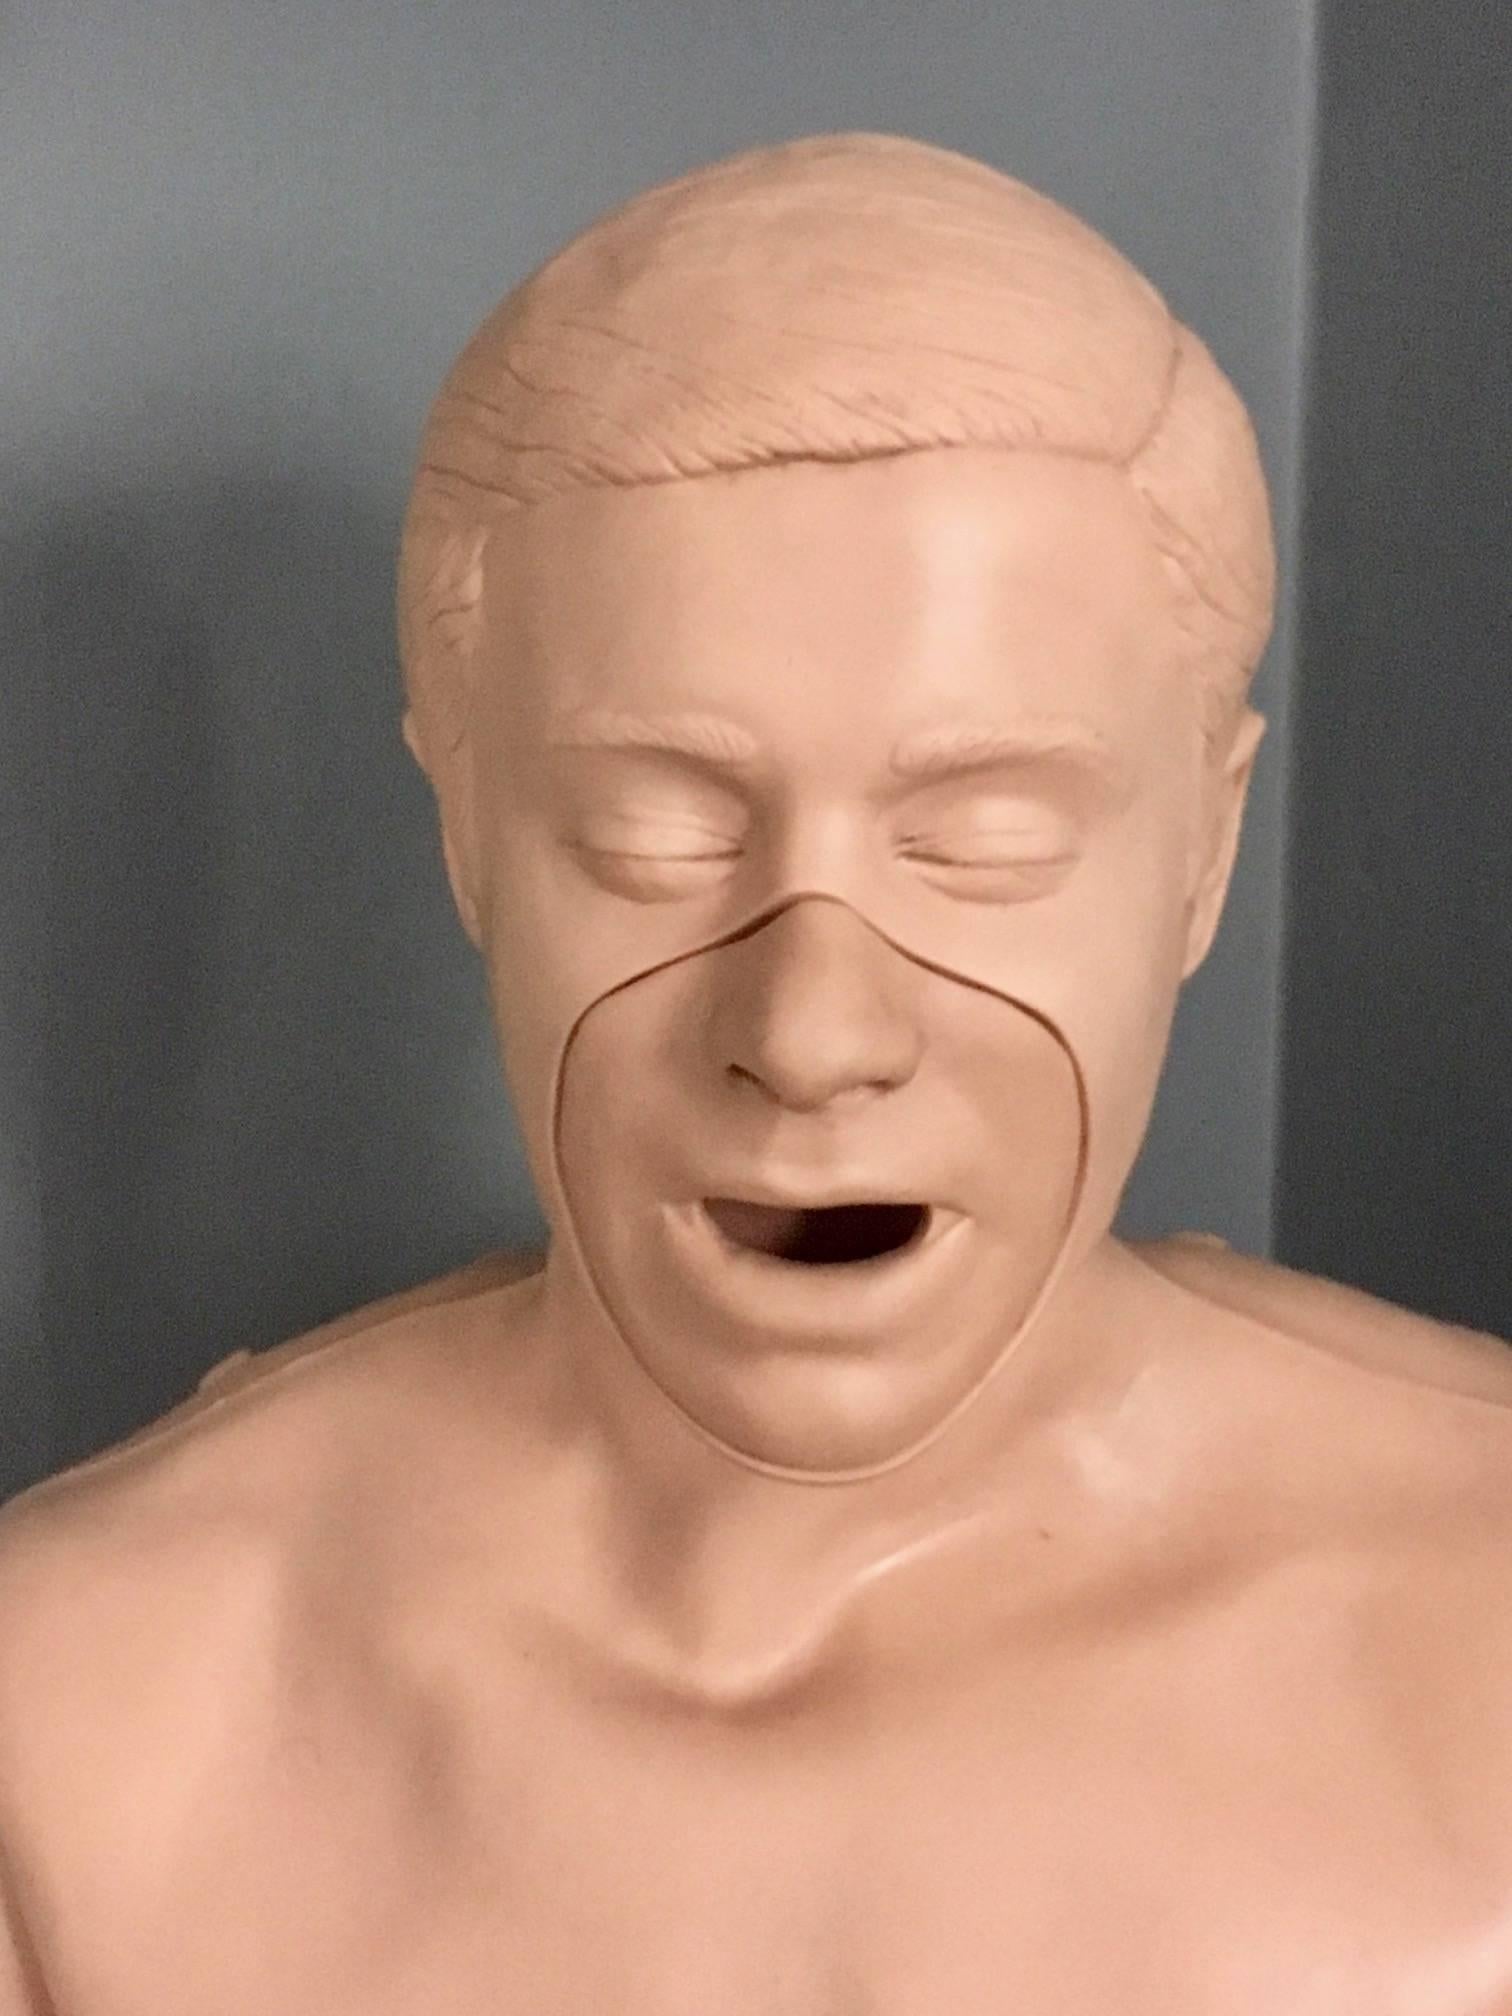 Interesting piece of medical ephemera. Full articulating. Many pieces come off to reveal inner body. Missing left hand and one shoulder insert. Very good vintage condition. Super unique piece.